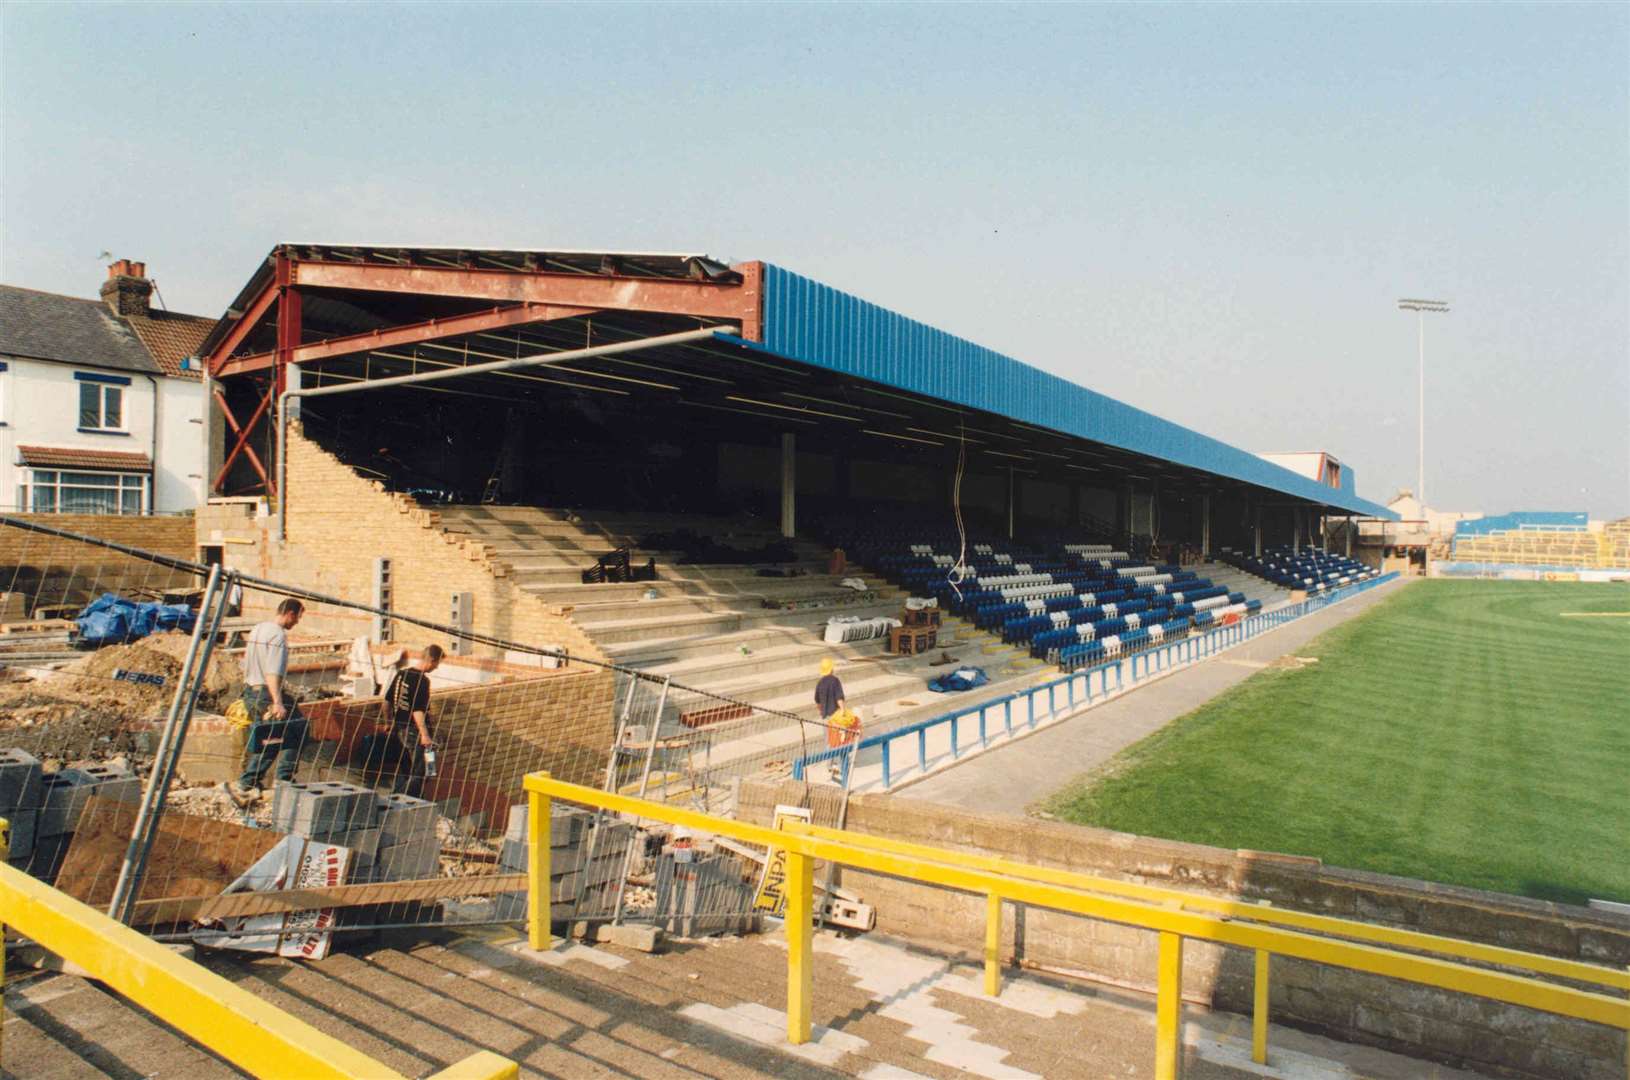 The new Gordon Road Stand at the Priestfield is built in 1997